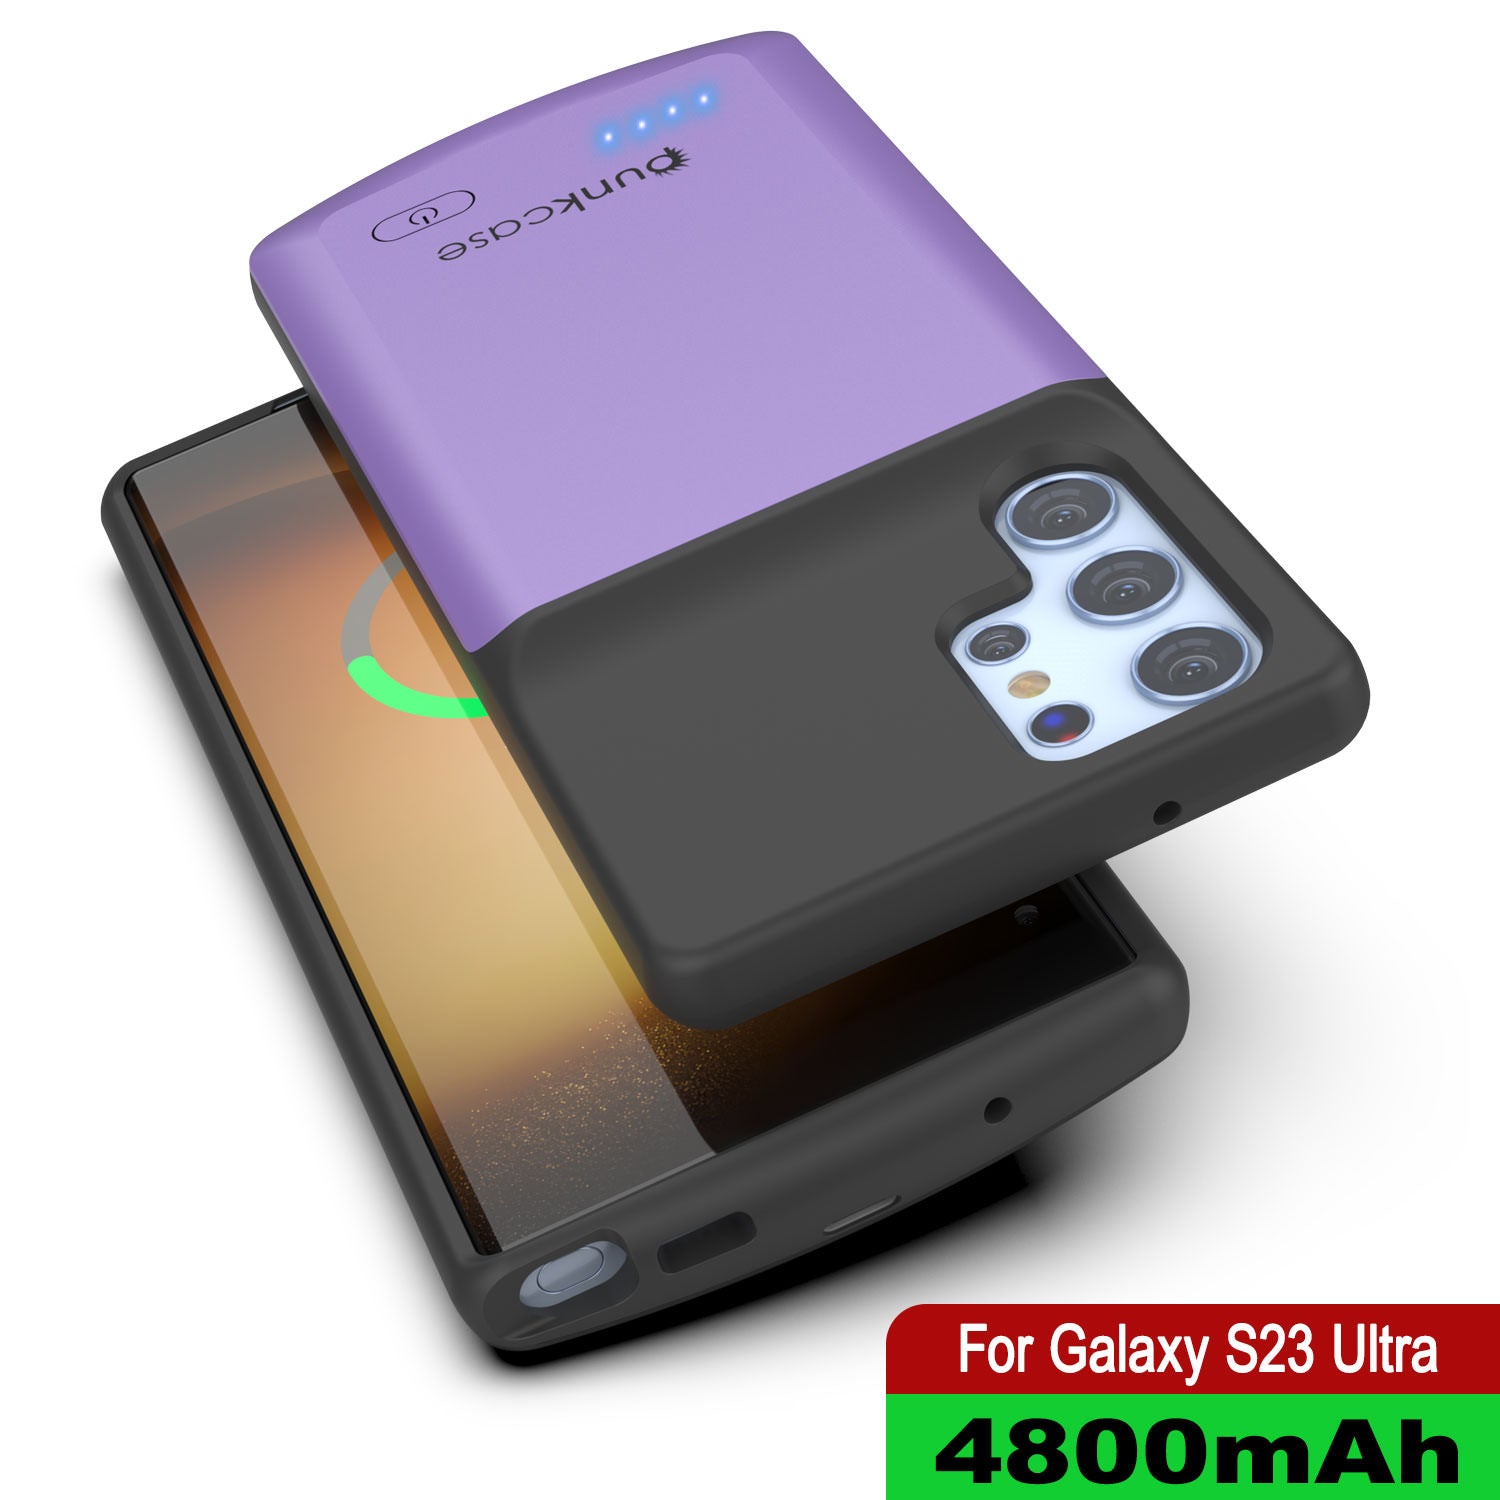 PunkJuice S24 Ultra Battery Case Purple - Portable Charging Power Juice Bank with 4500mAh